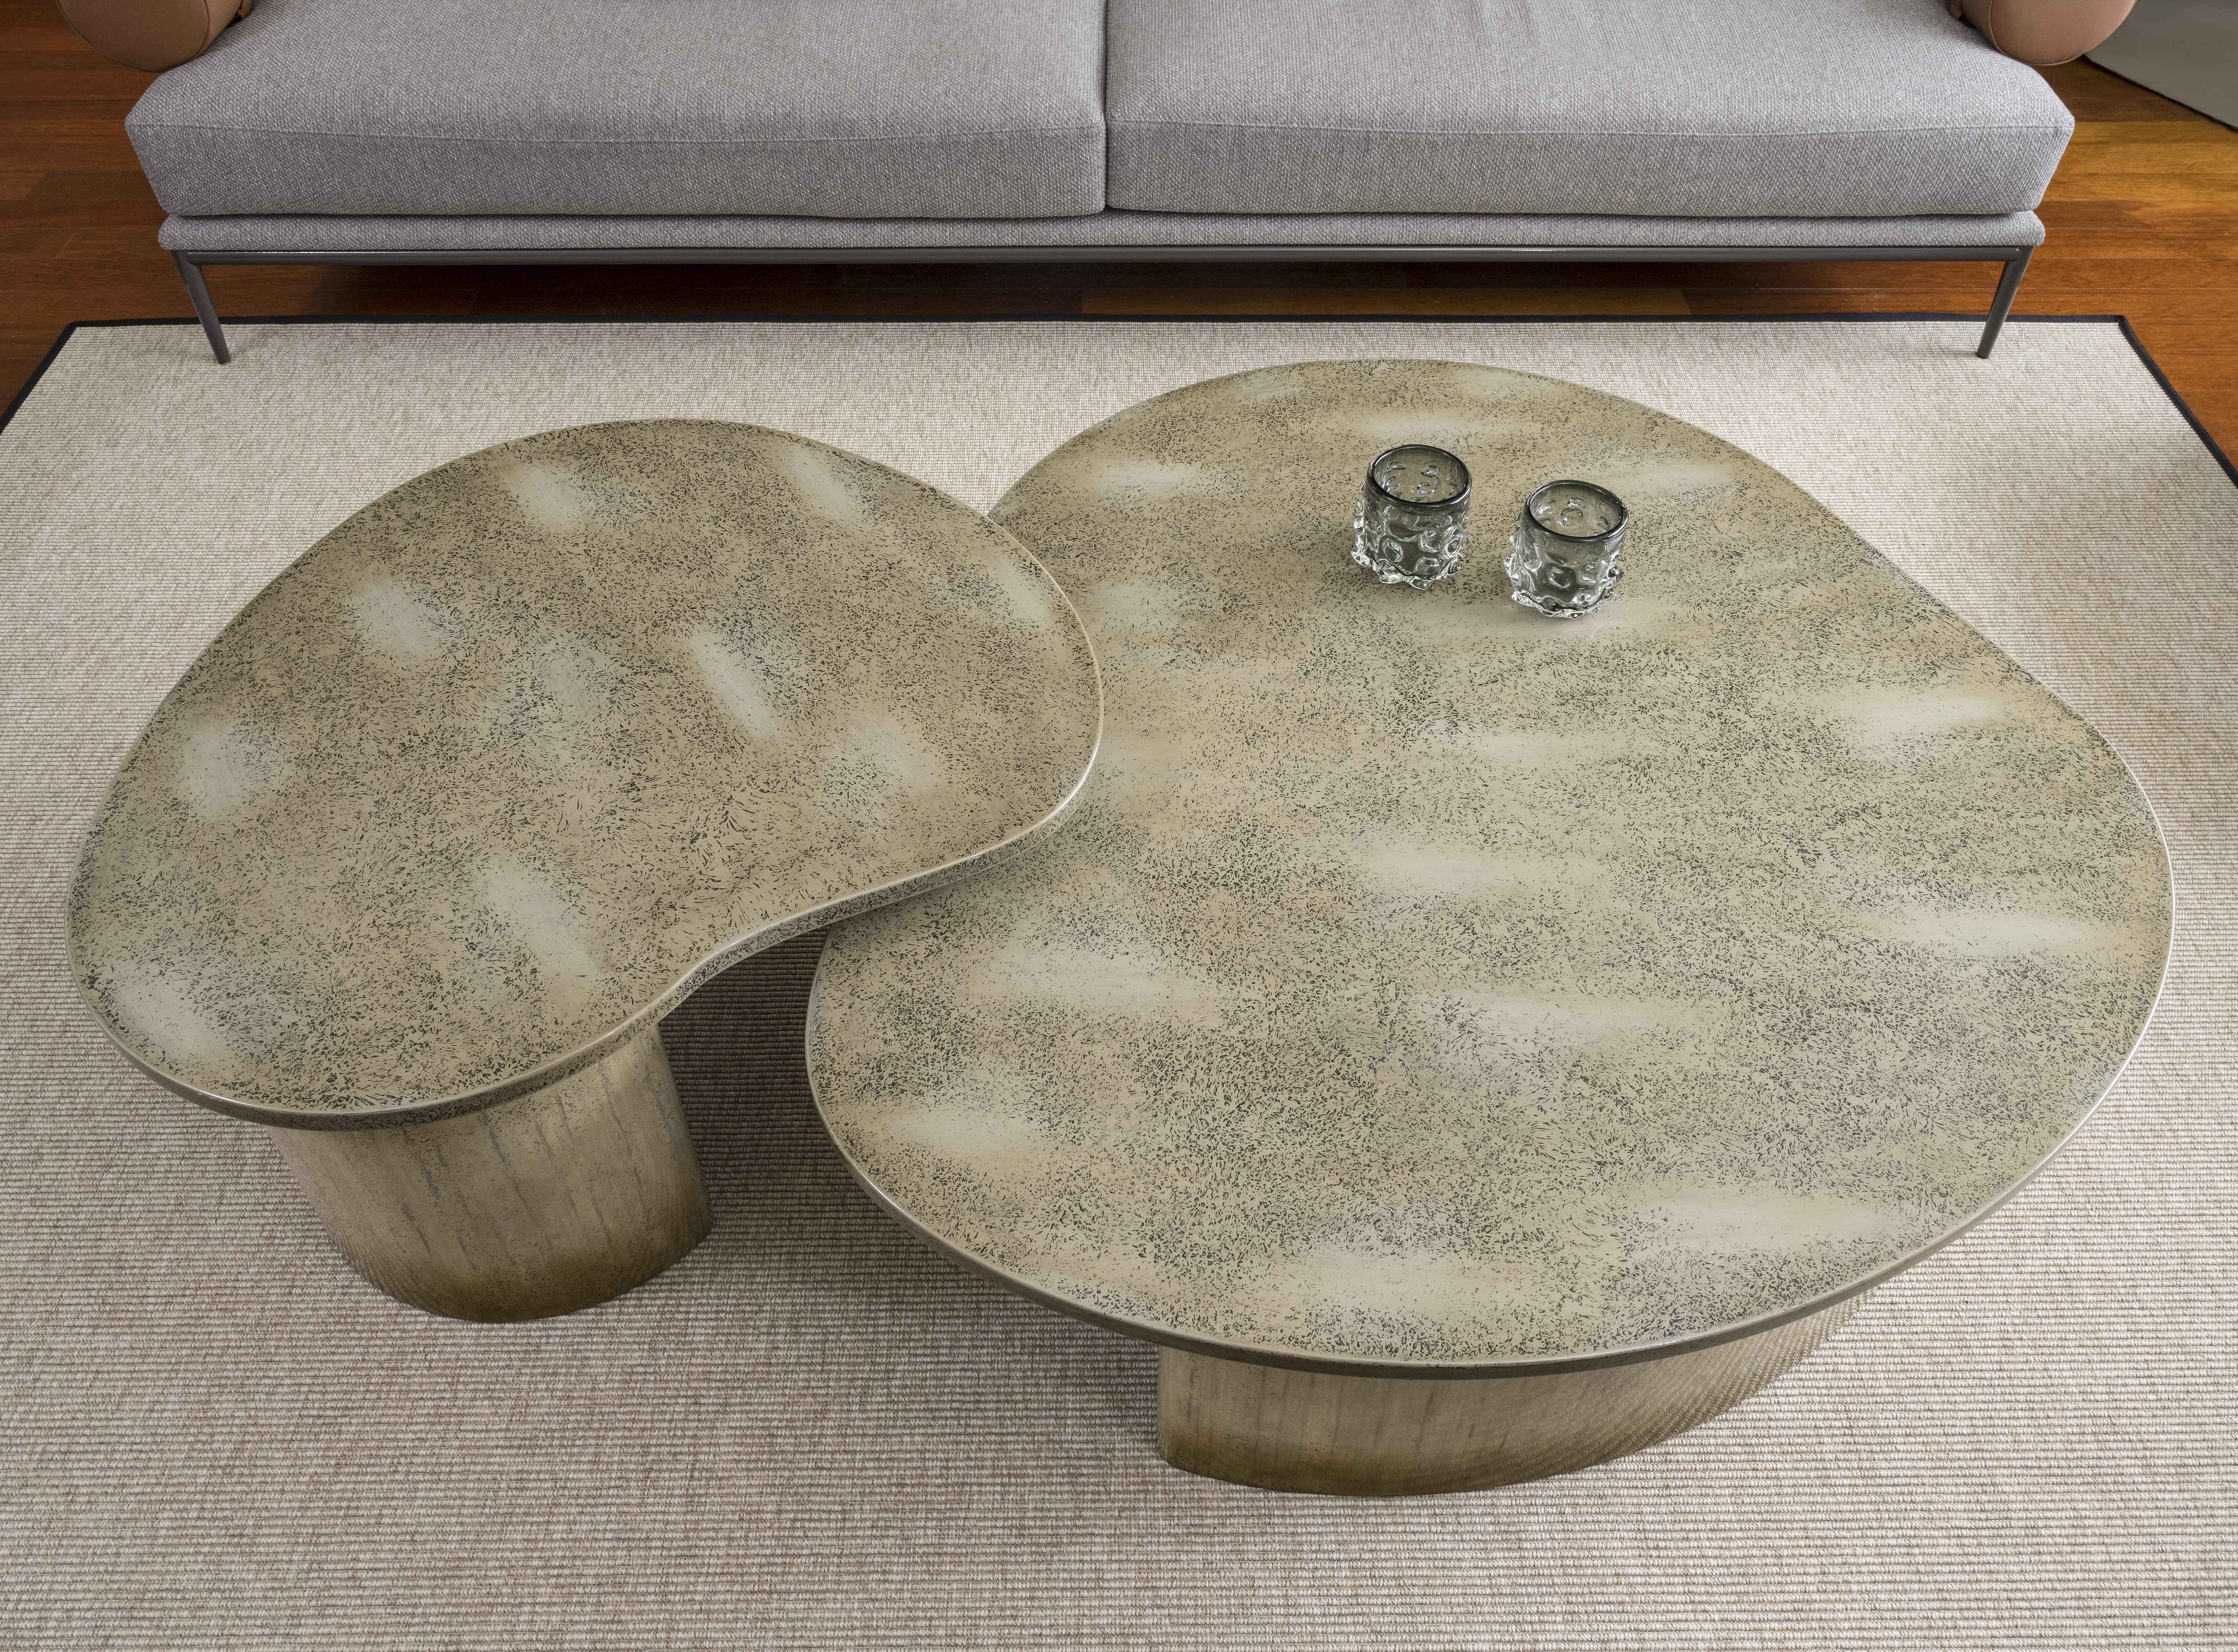 Taş is inspired by different patterns found in nature. The top, as it gives its name to the product, is designed to resemble the texture of a stone. The amorphous form of Taş, allows us to see the different reflections of the patterned lacquer